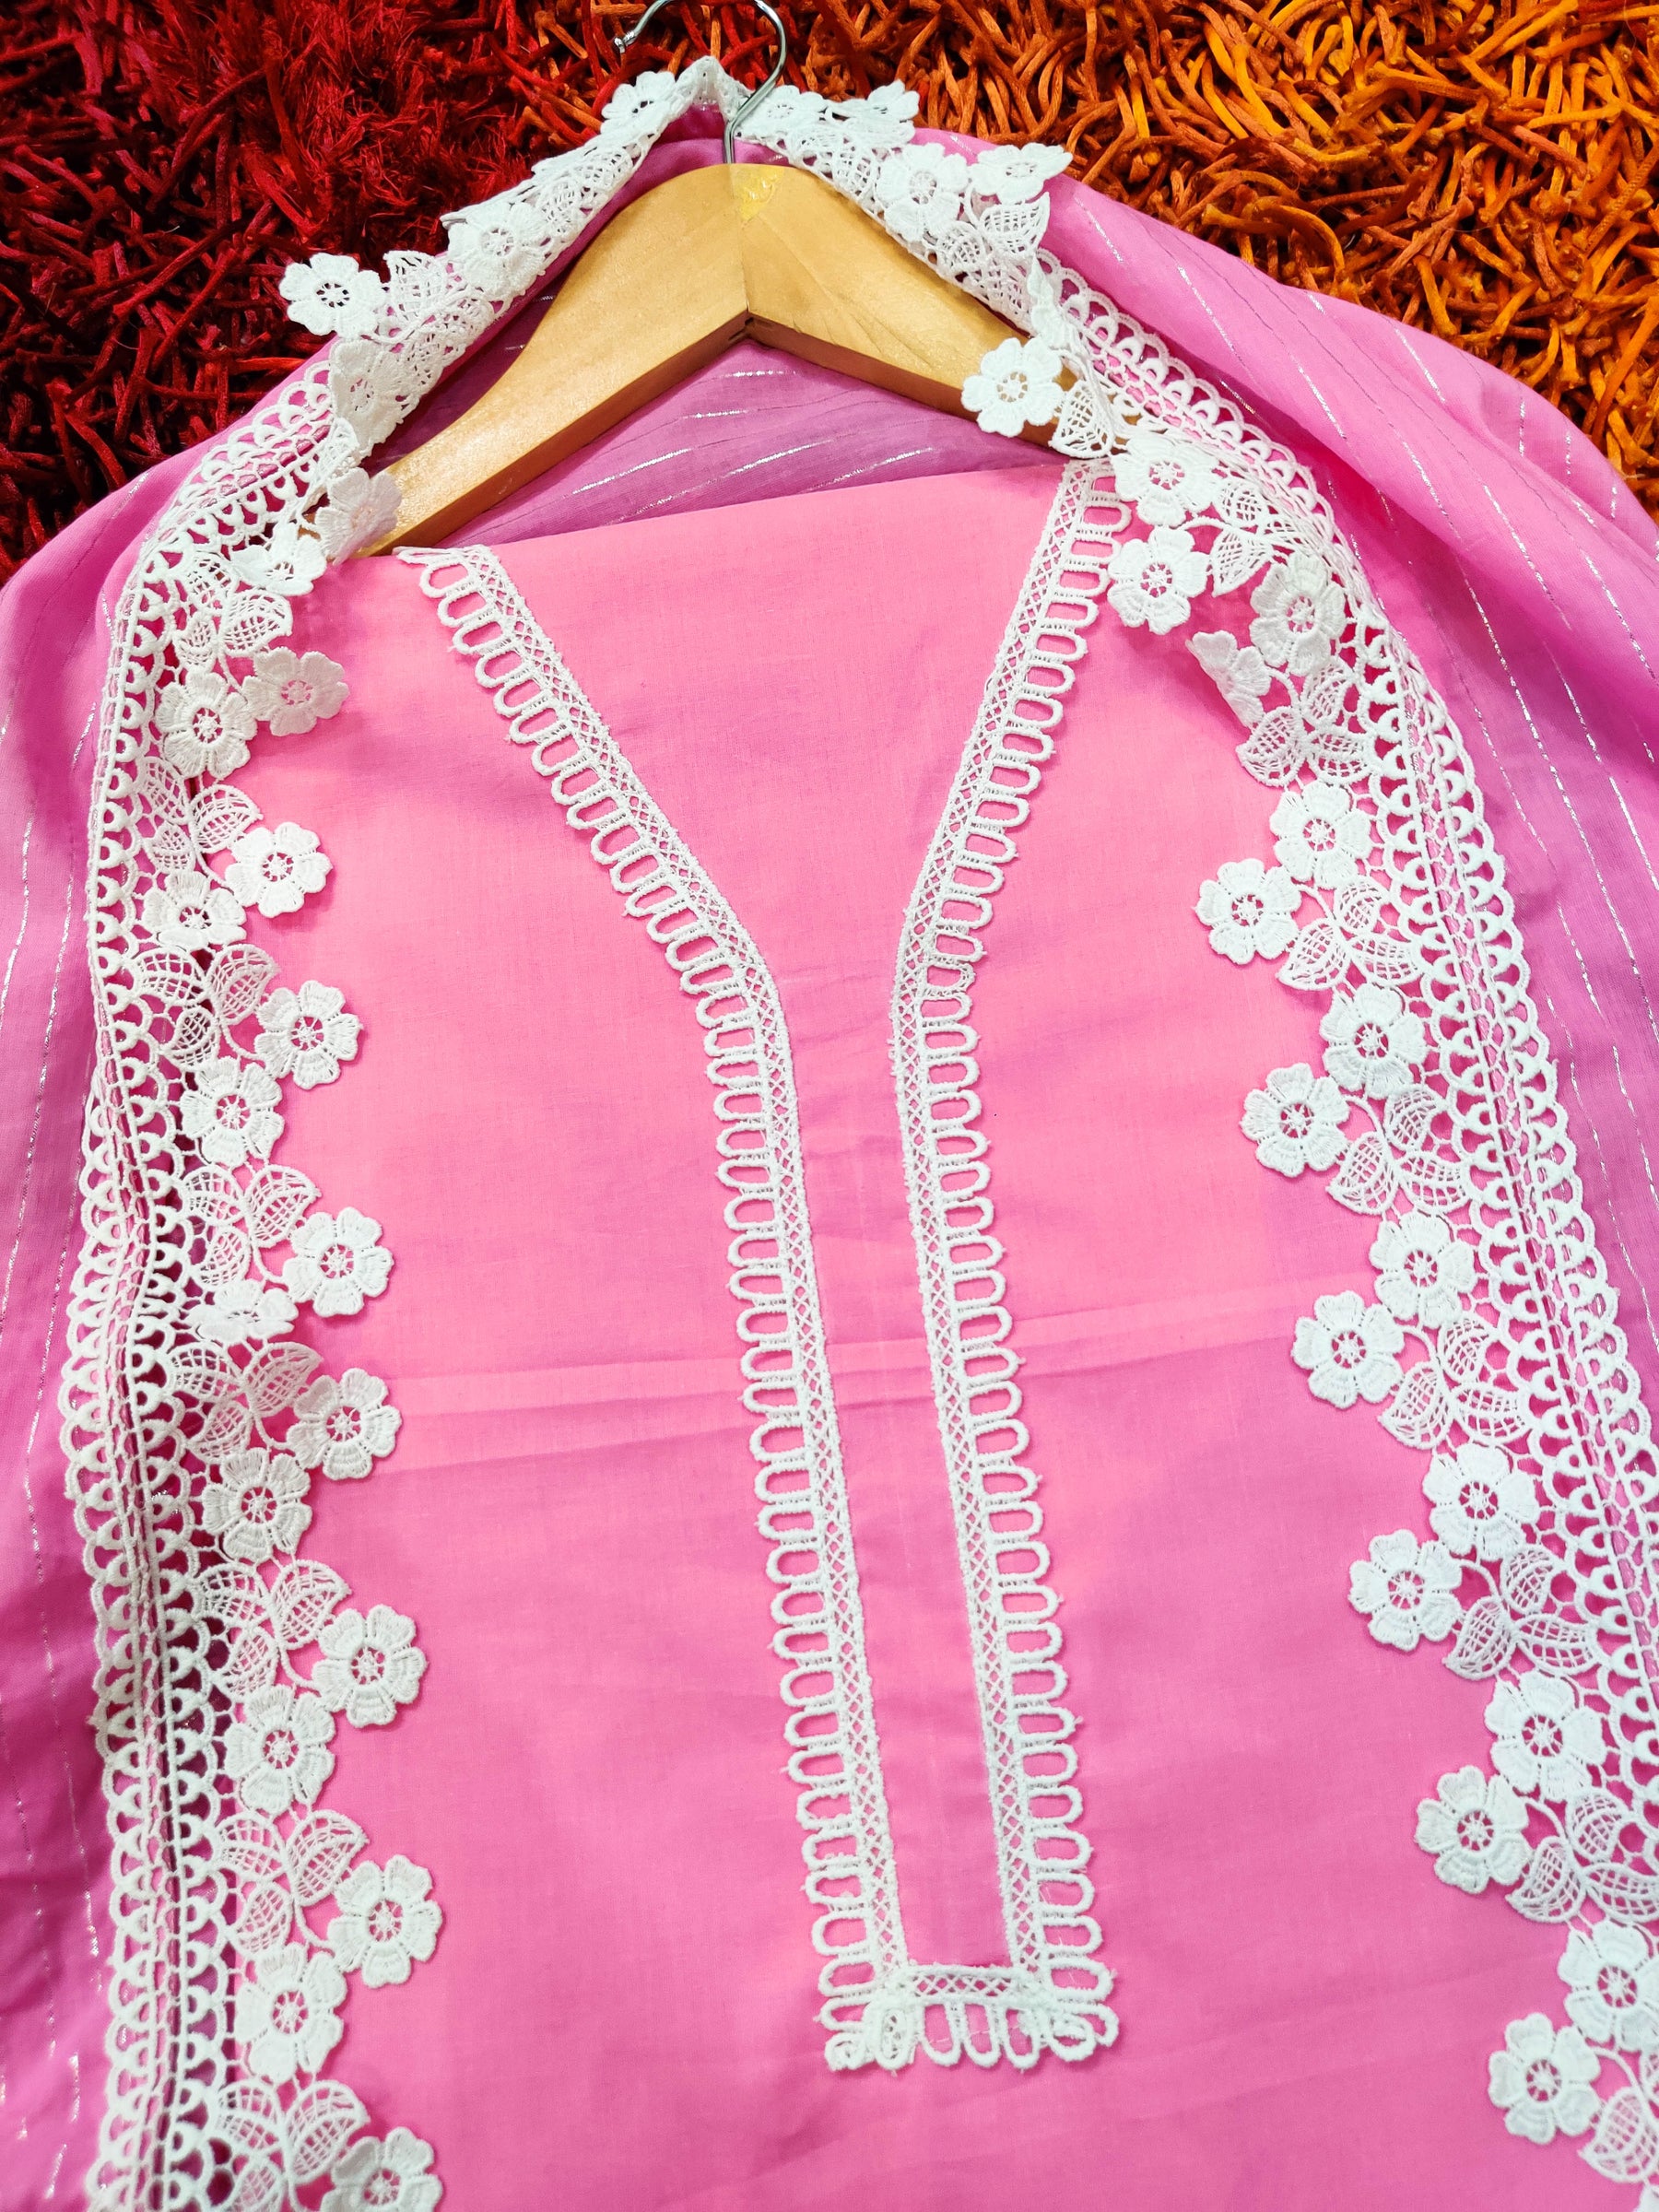 Pink Cotton Adorned with Elegant White Lace Unstitched Dress Material Suit Set